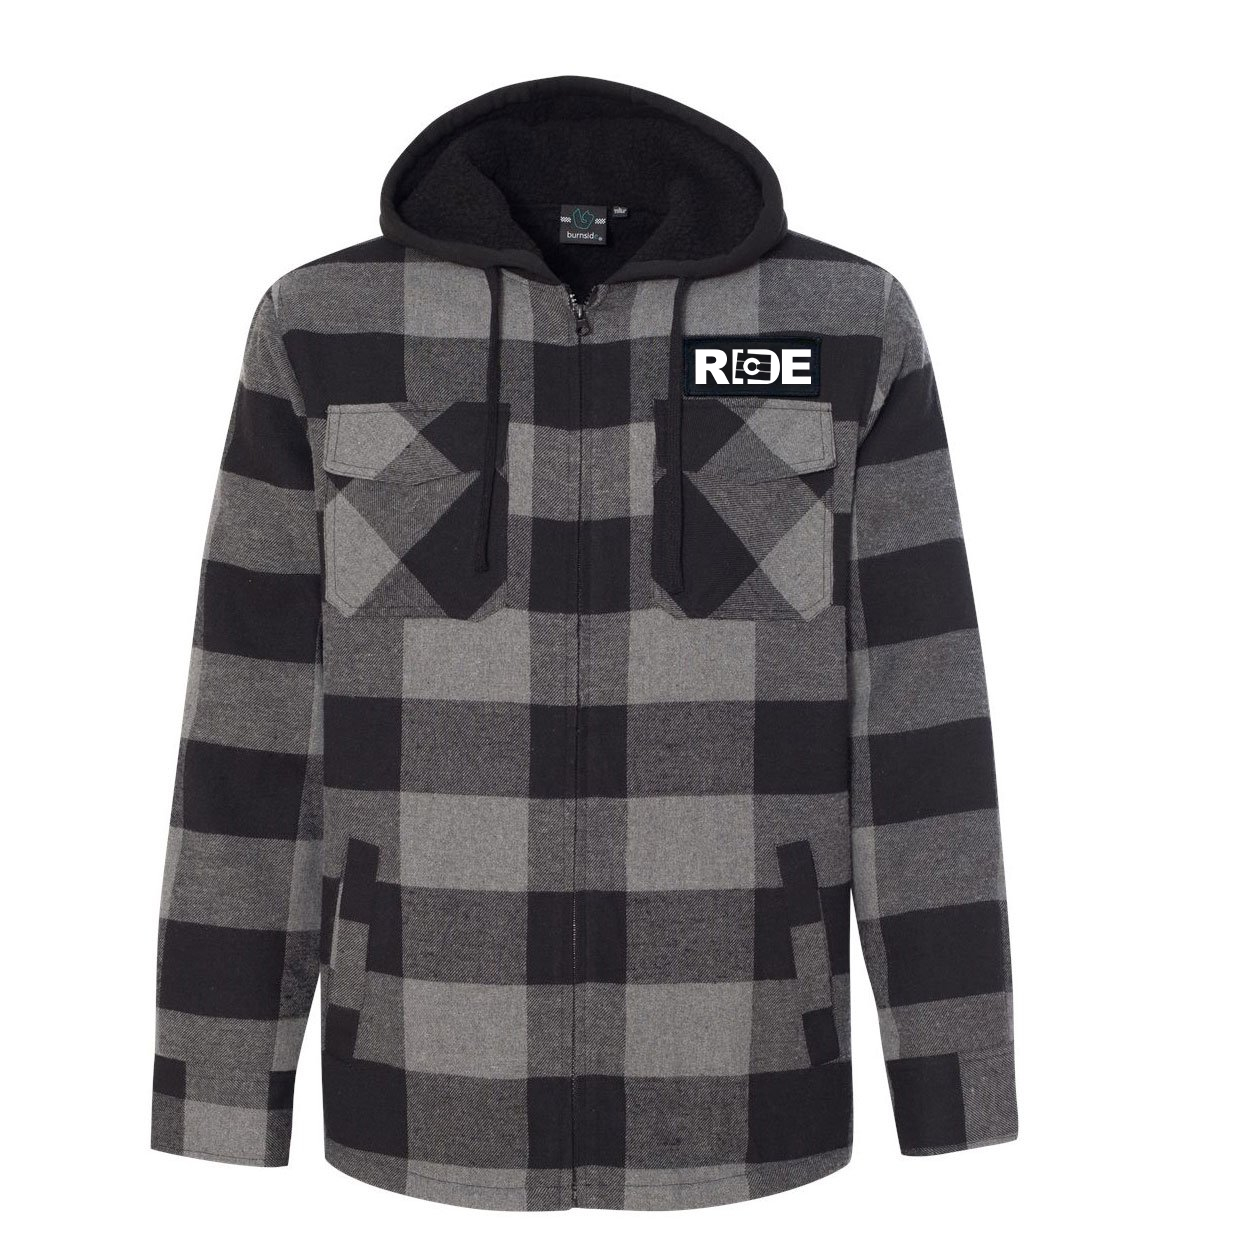 Ride Colorado Classic Unisex Full Zip Woven Patch Hooded Flannel Jacket Black/Gray (White Logo)